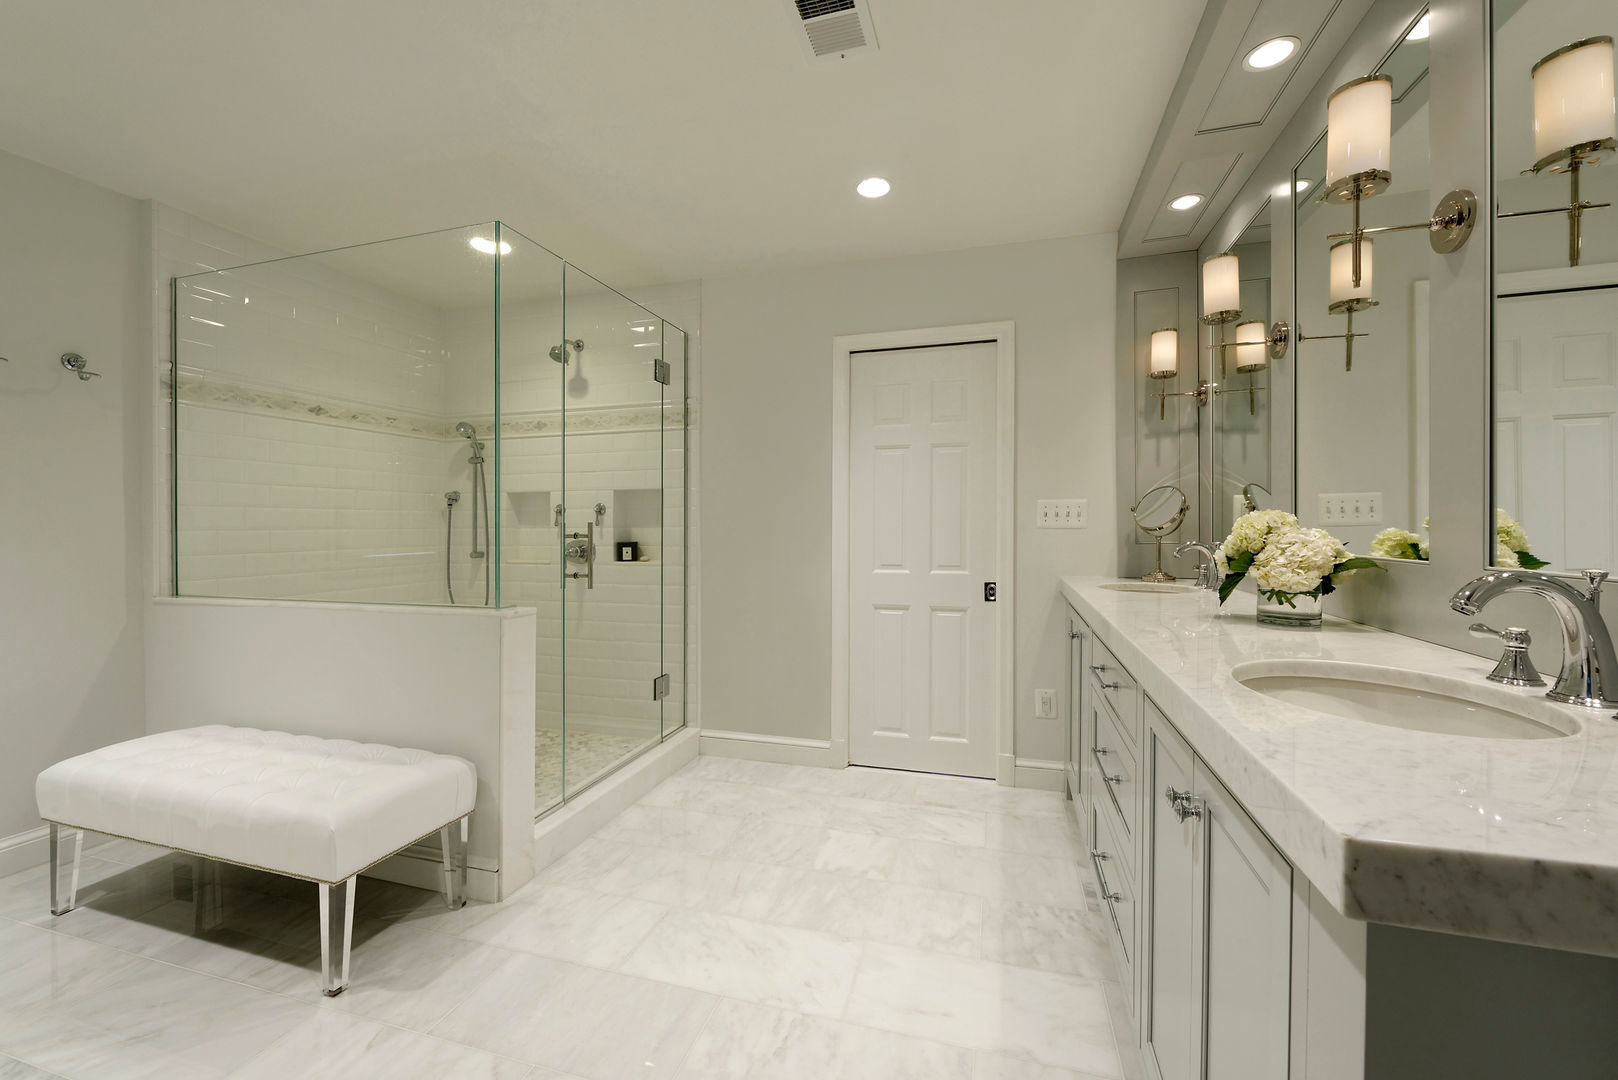 Whole House Design Build Renovation in Bethesda, MD BOWA - Design Build Experts Classic style bathroom